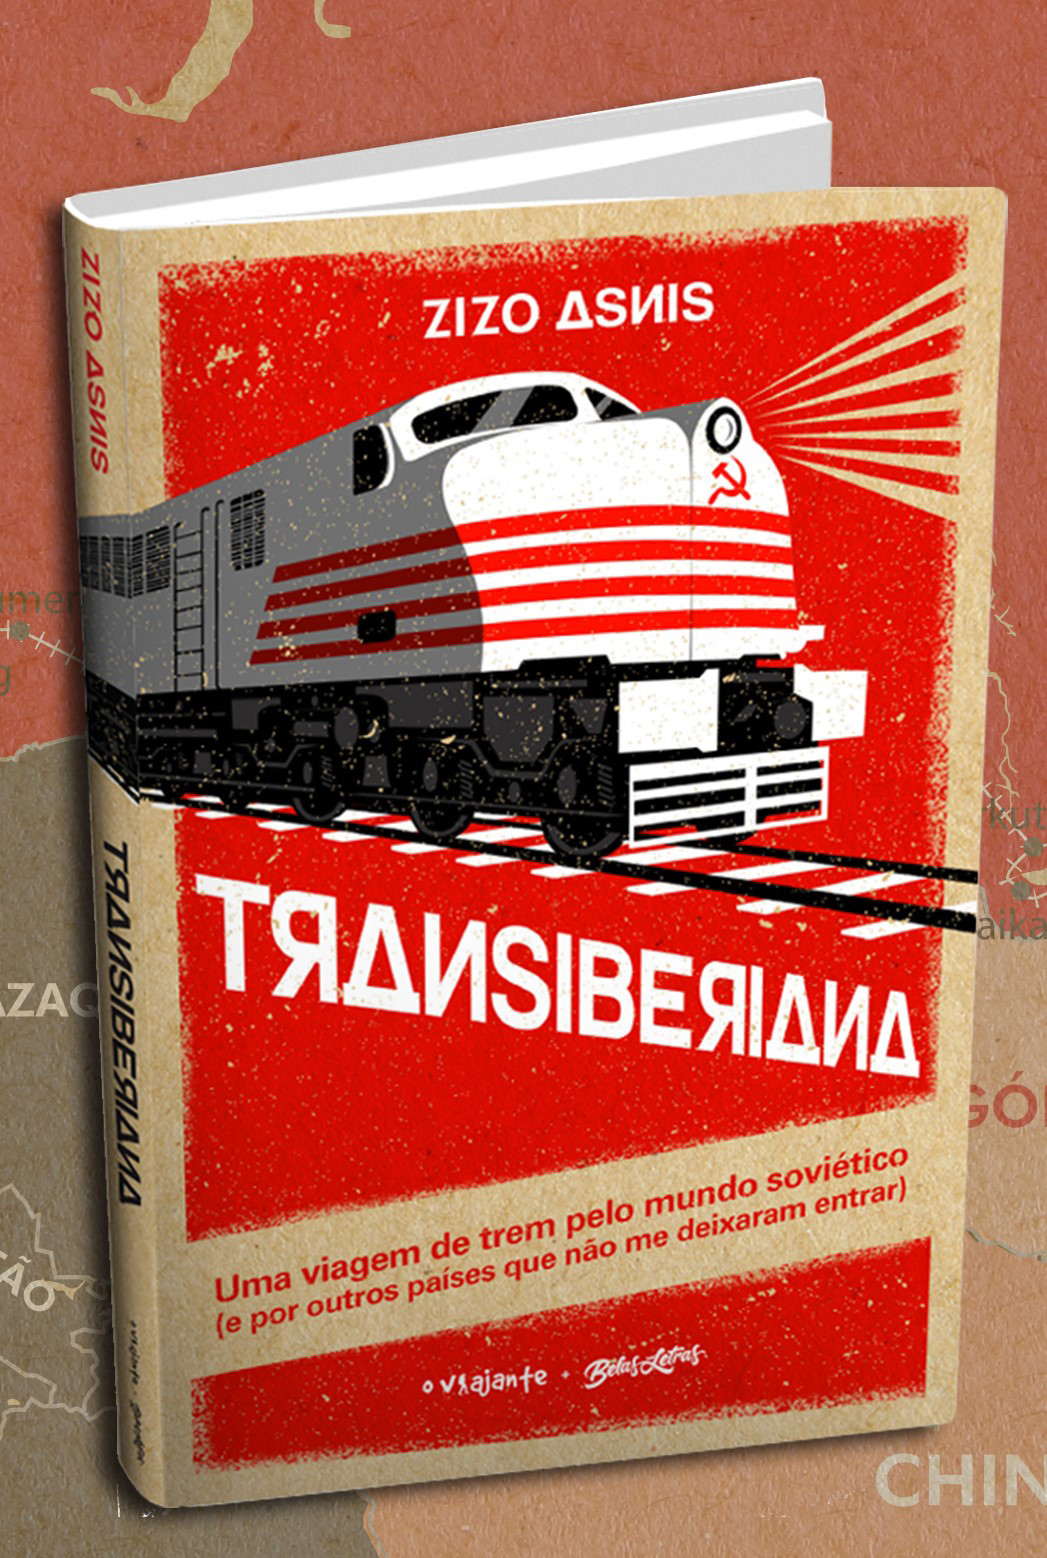 “Transiberiana – A train trip through the Soviet world (and other countries that would not let me in)”, Zizo's travel book about Russia